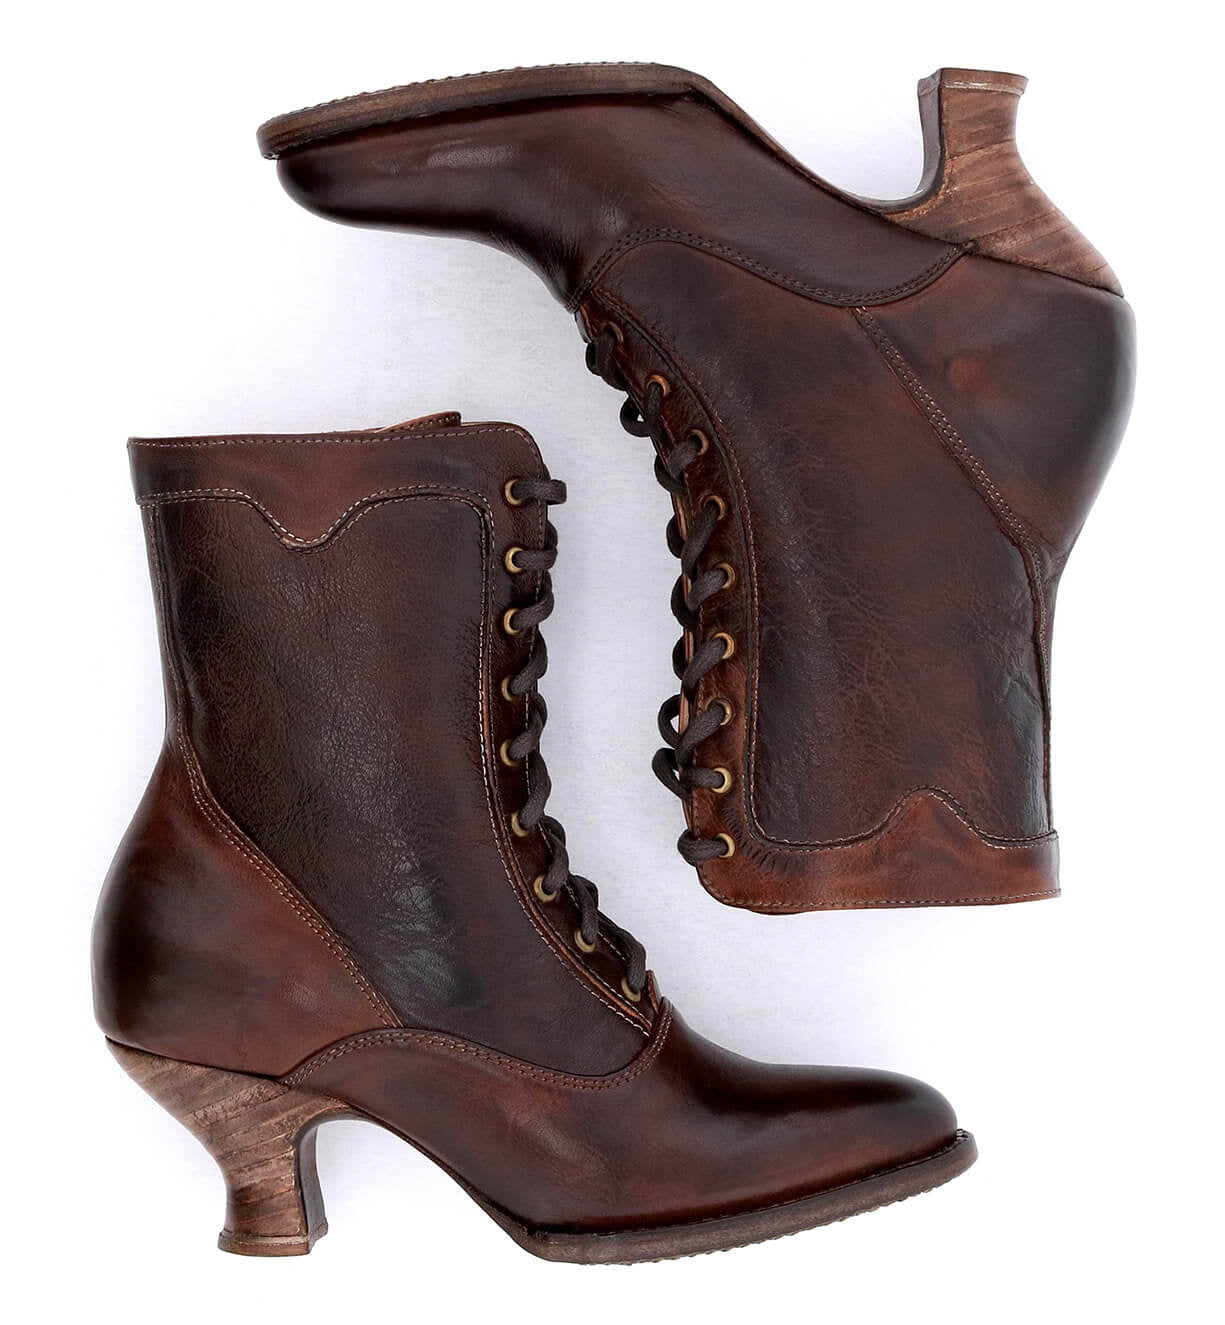 A pair of Eleanor Victorian style brown leather boots by Oak Tree Farms on a white background, showcasing uncompromising quality.